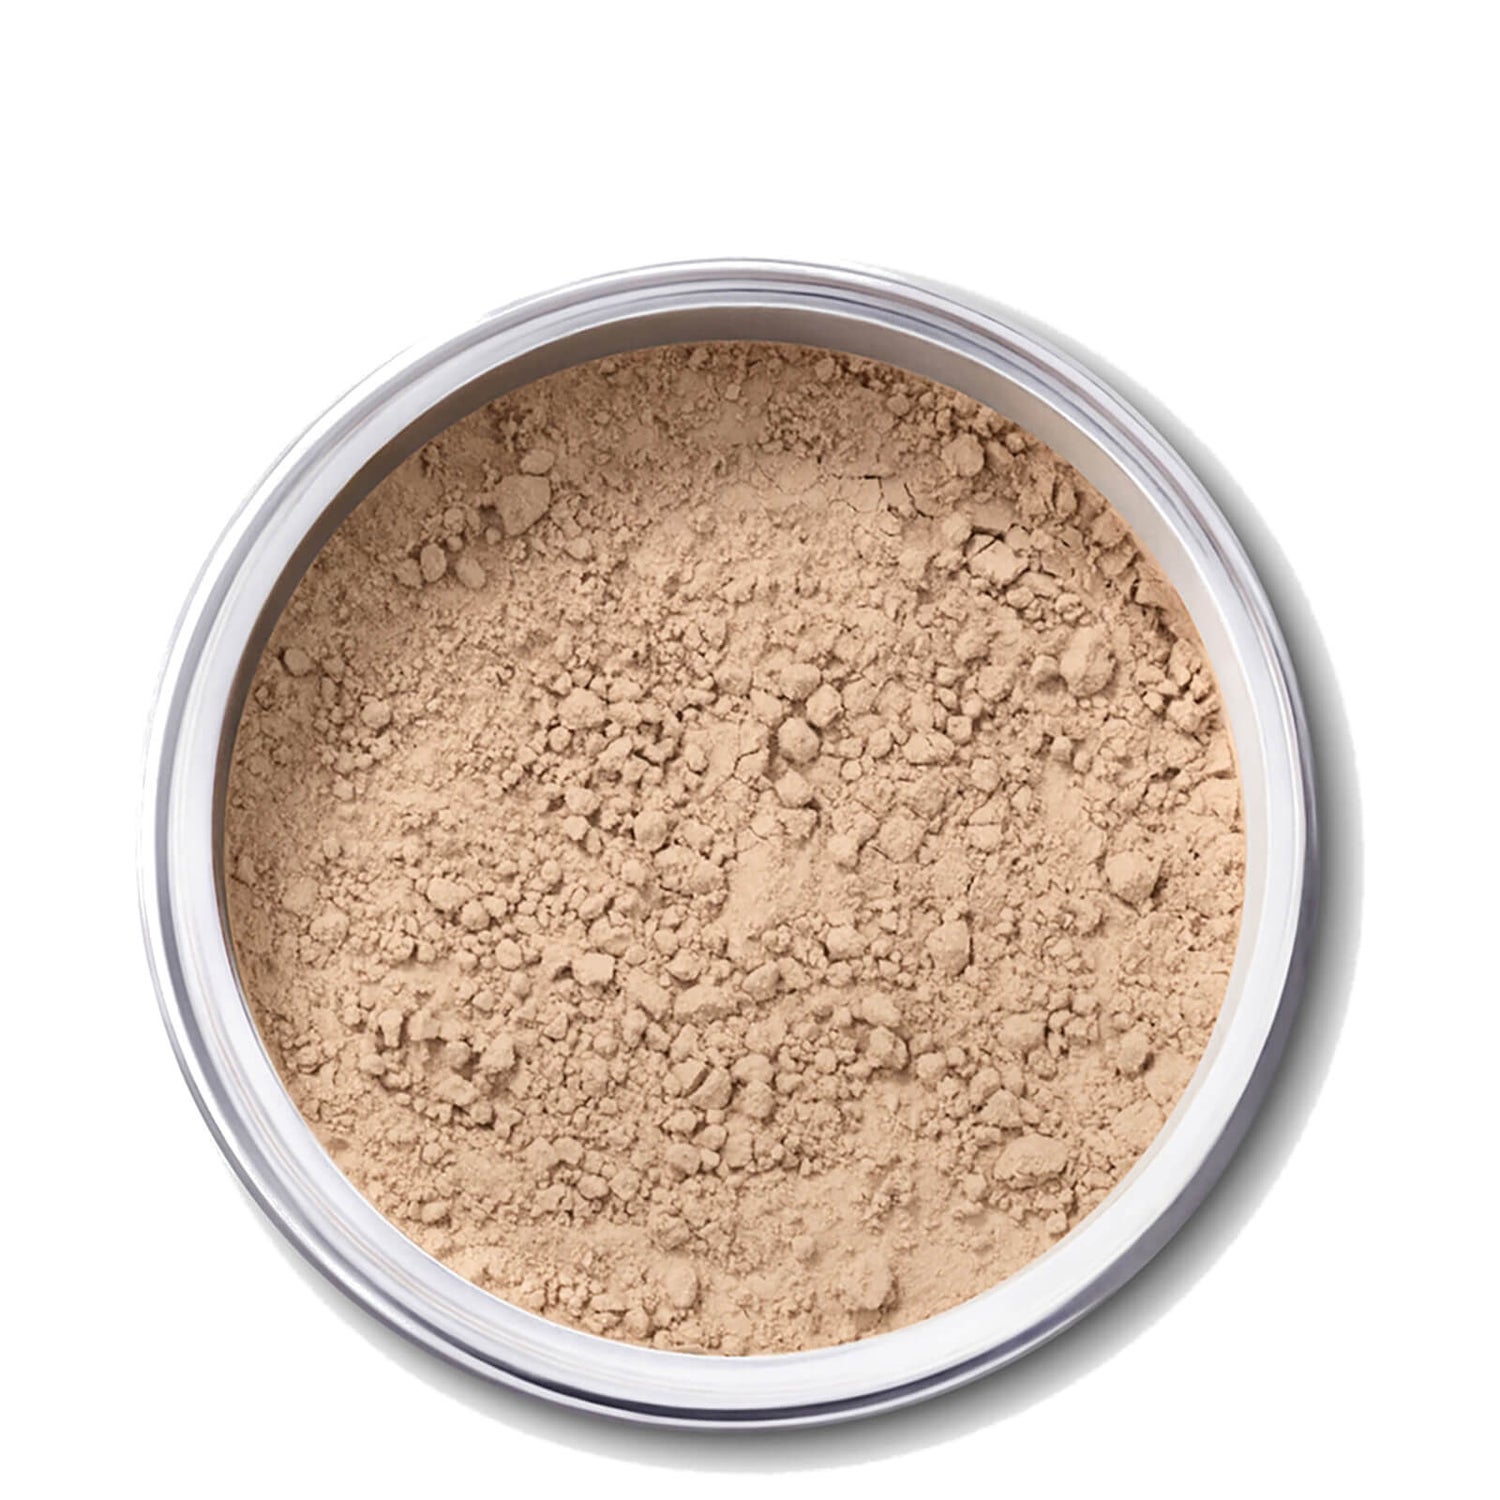 EX1 Cosmetics Pure Crushed Mineral Powder Foundation 8g (Various Shades)